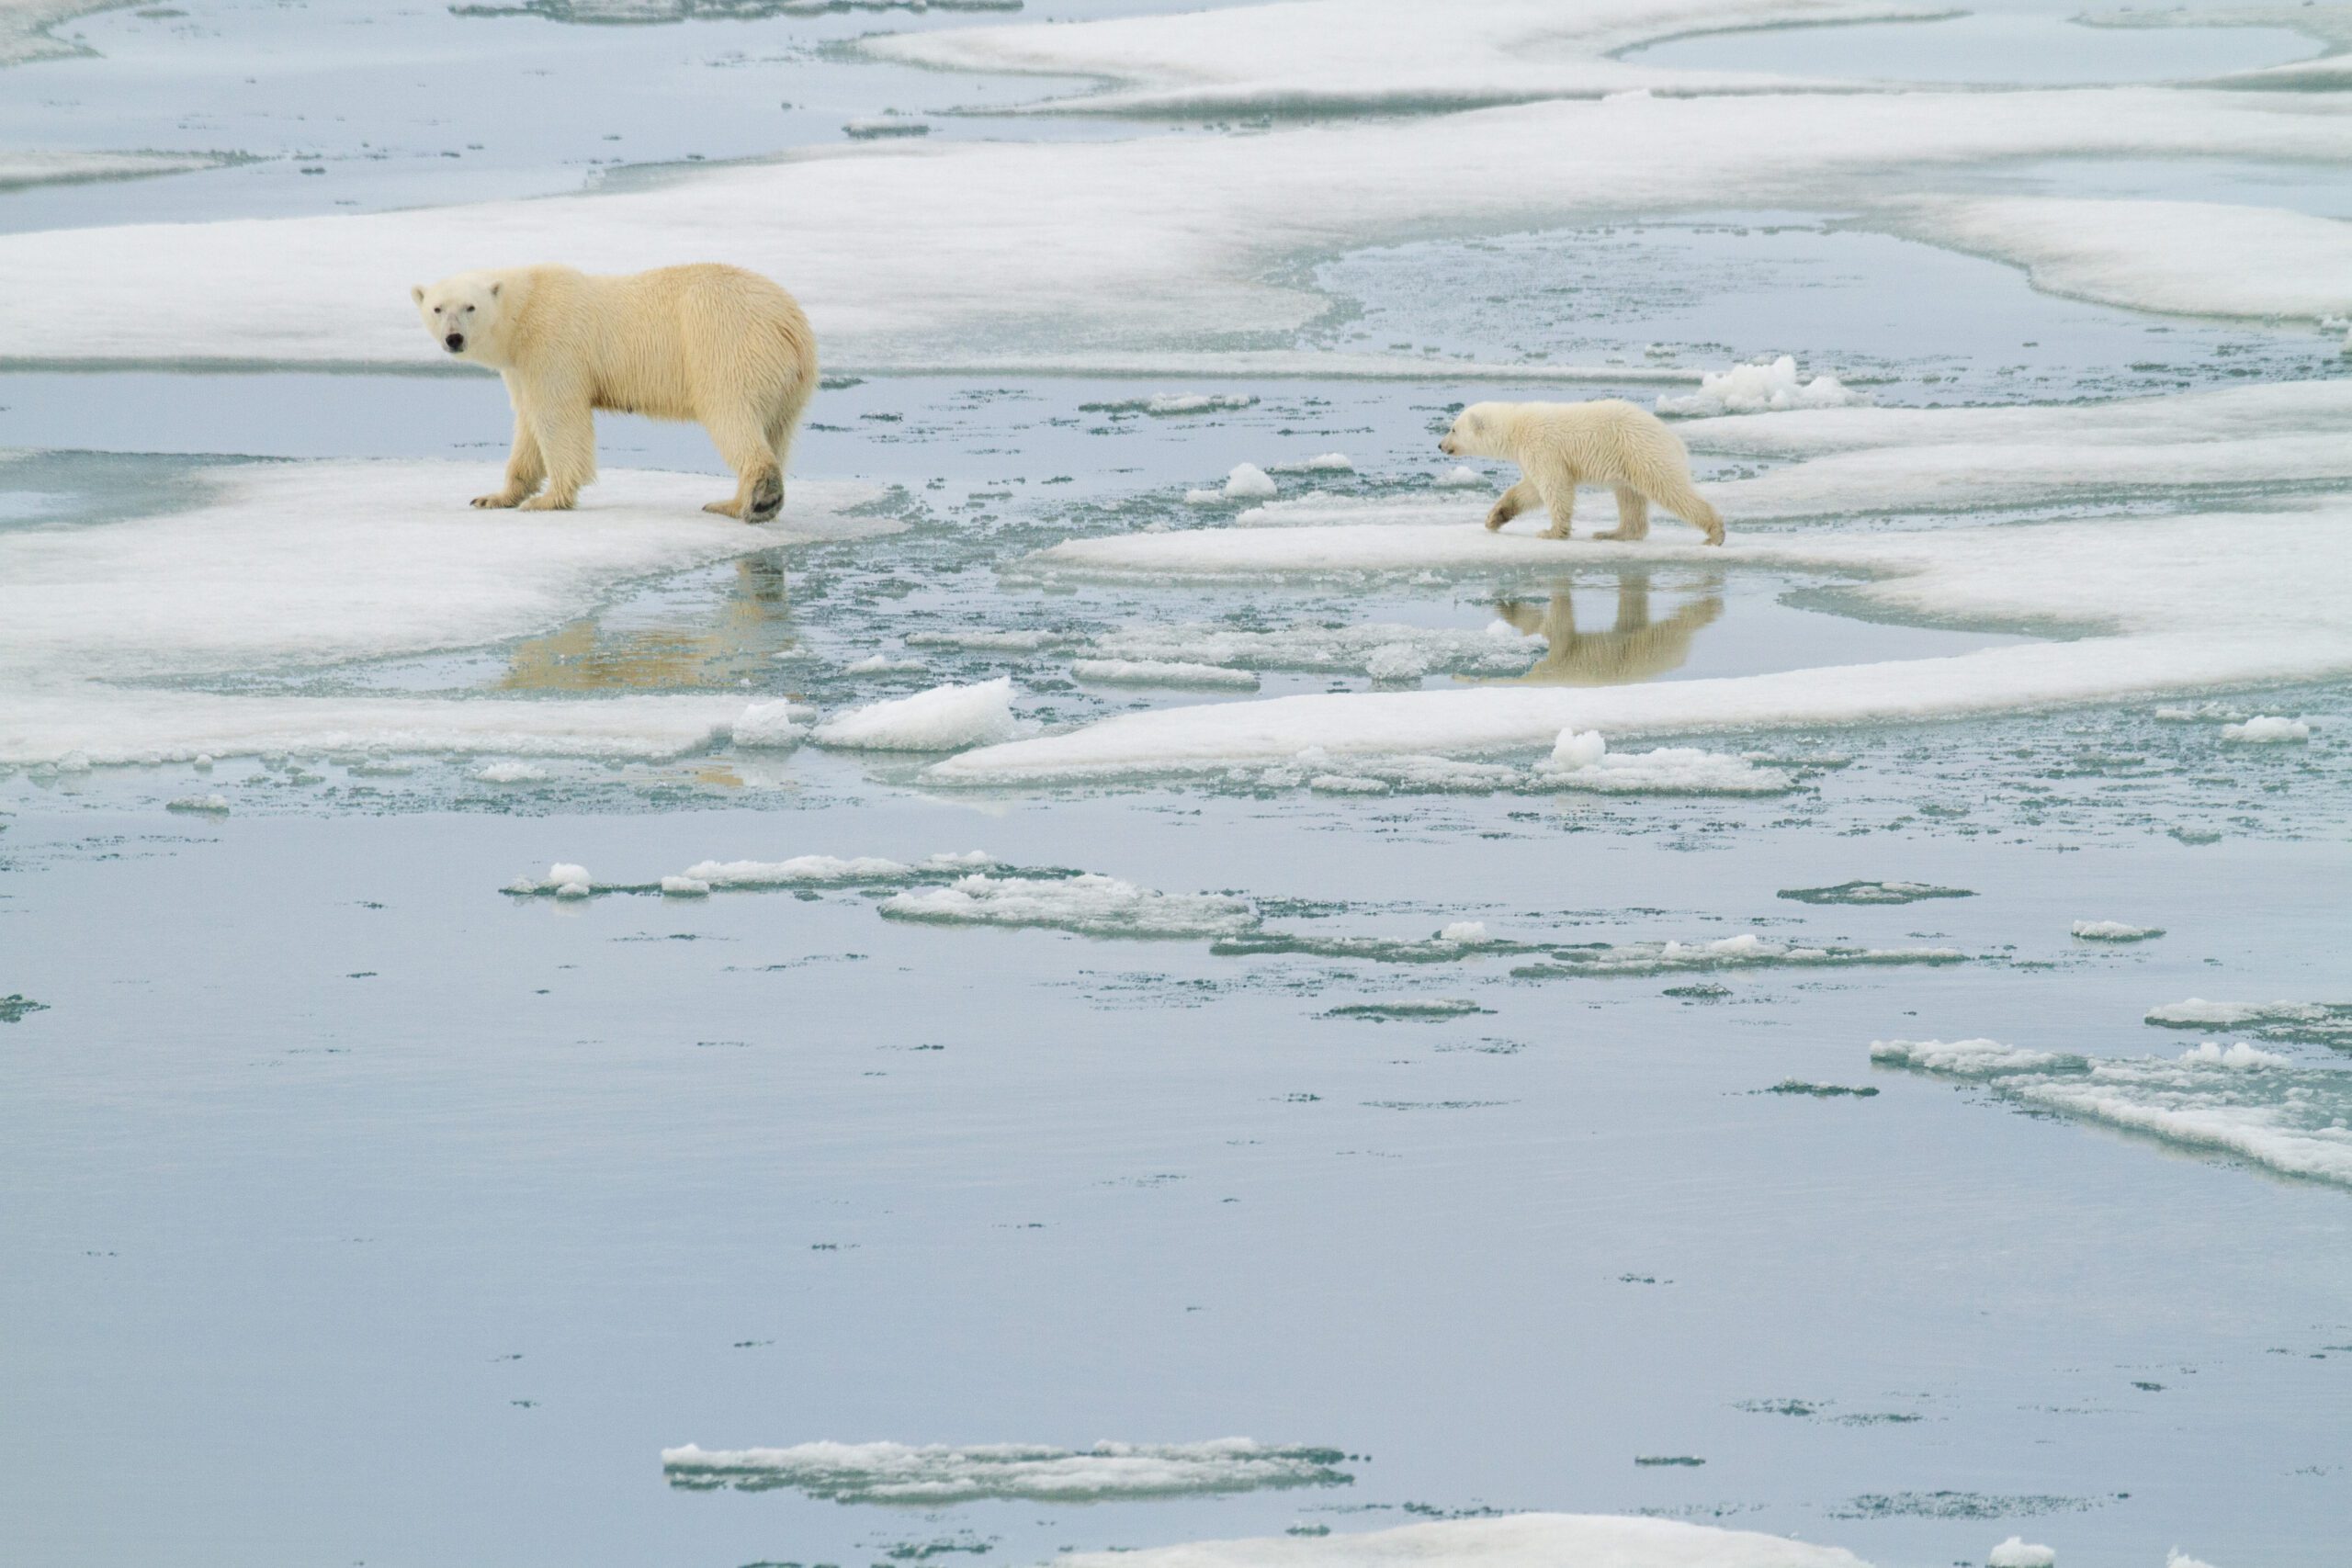 Zoos Support Polar Bear Conservation Research in the Wild – Guest Blog